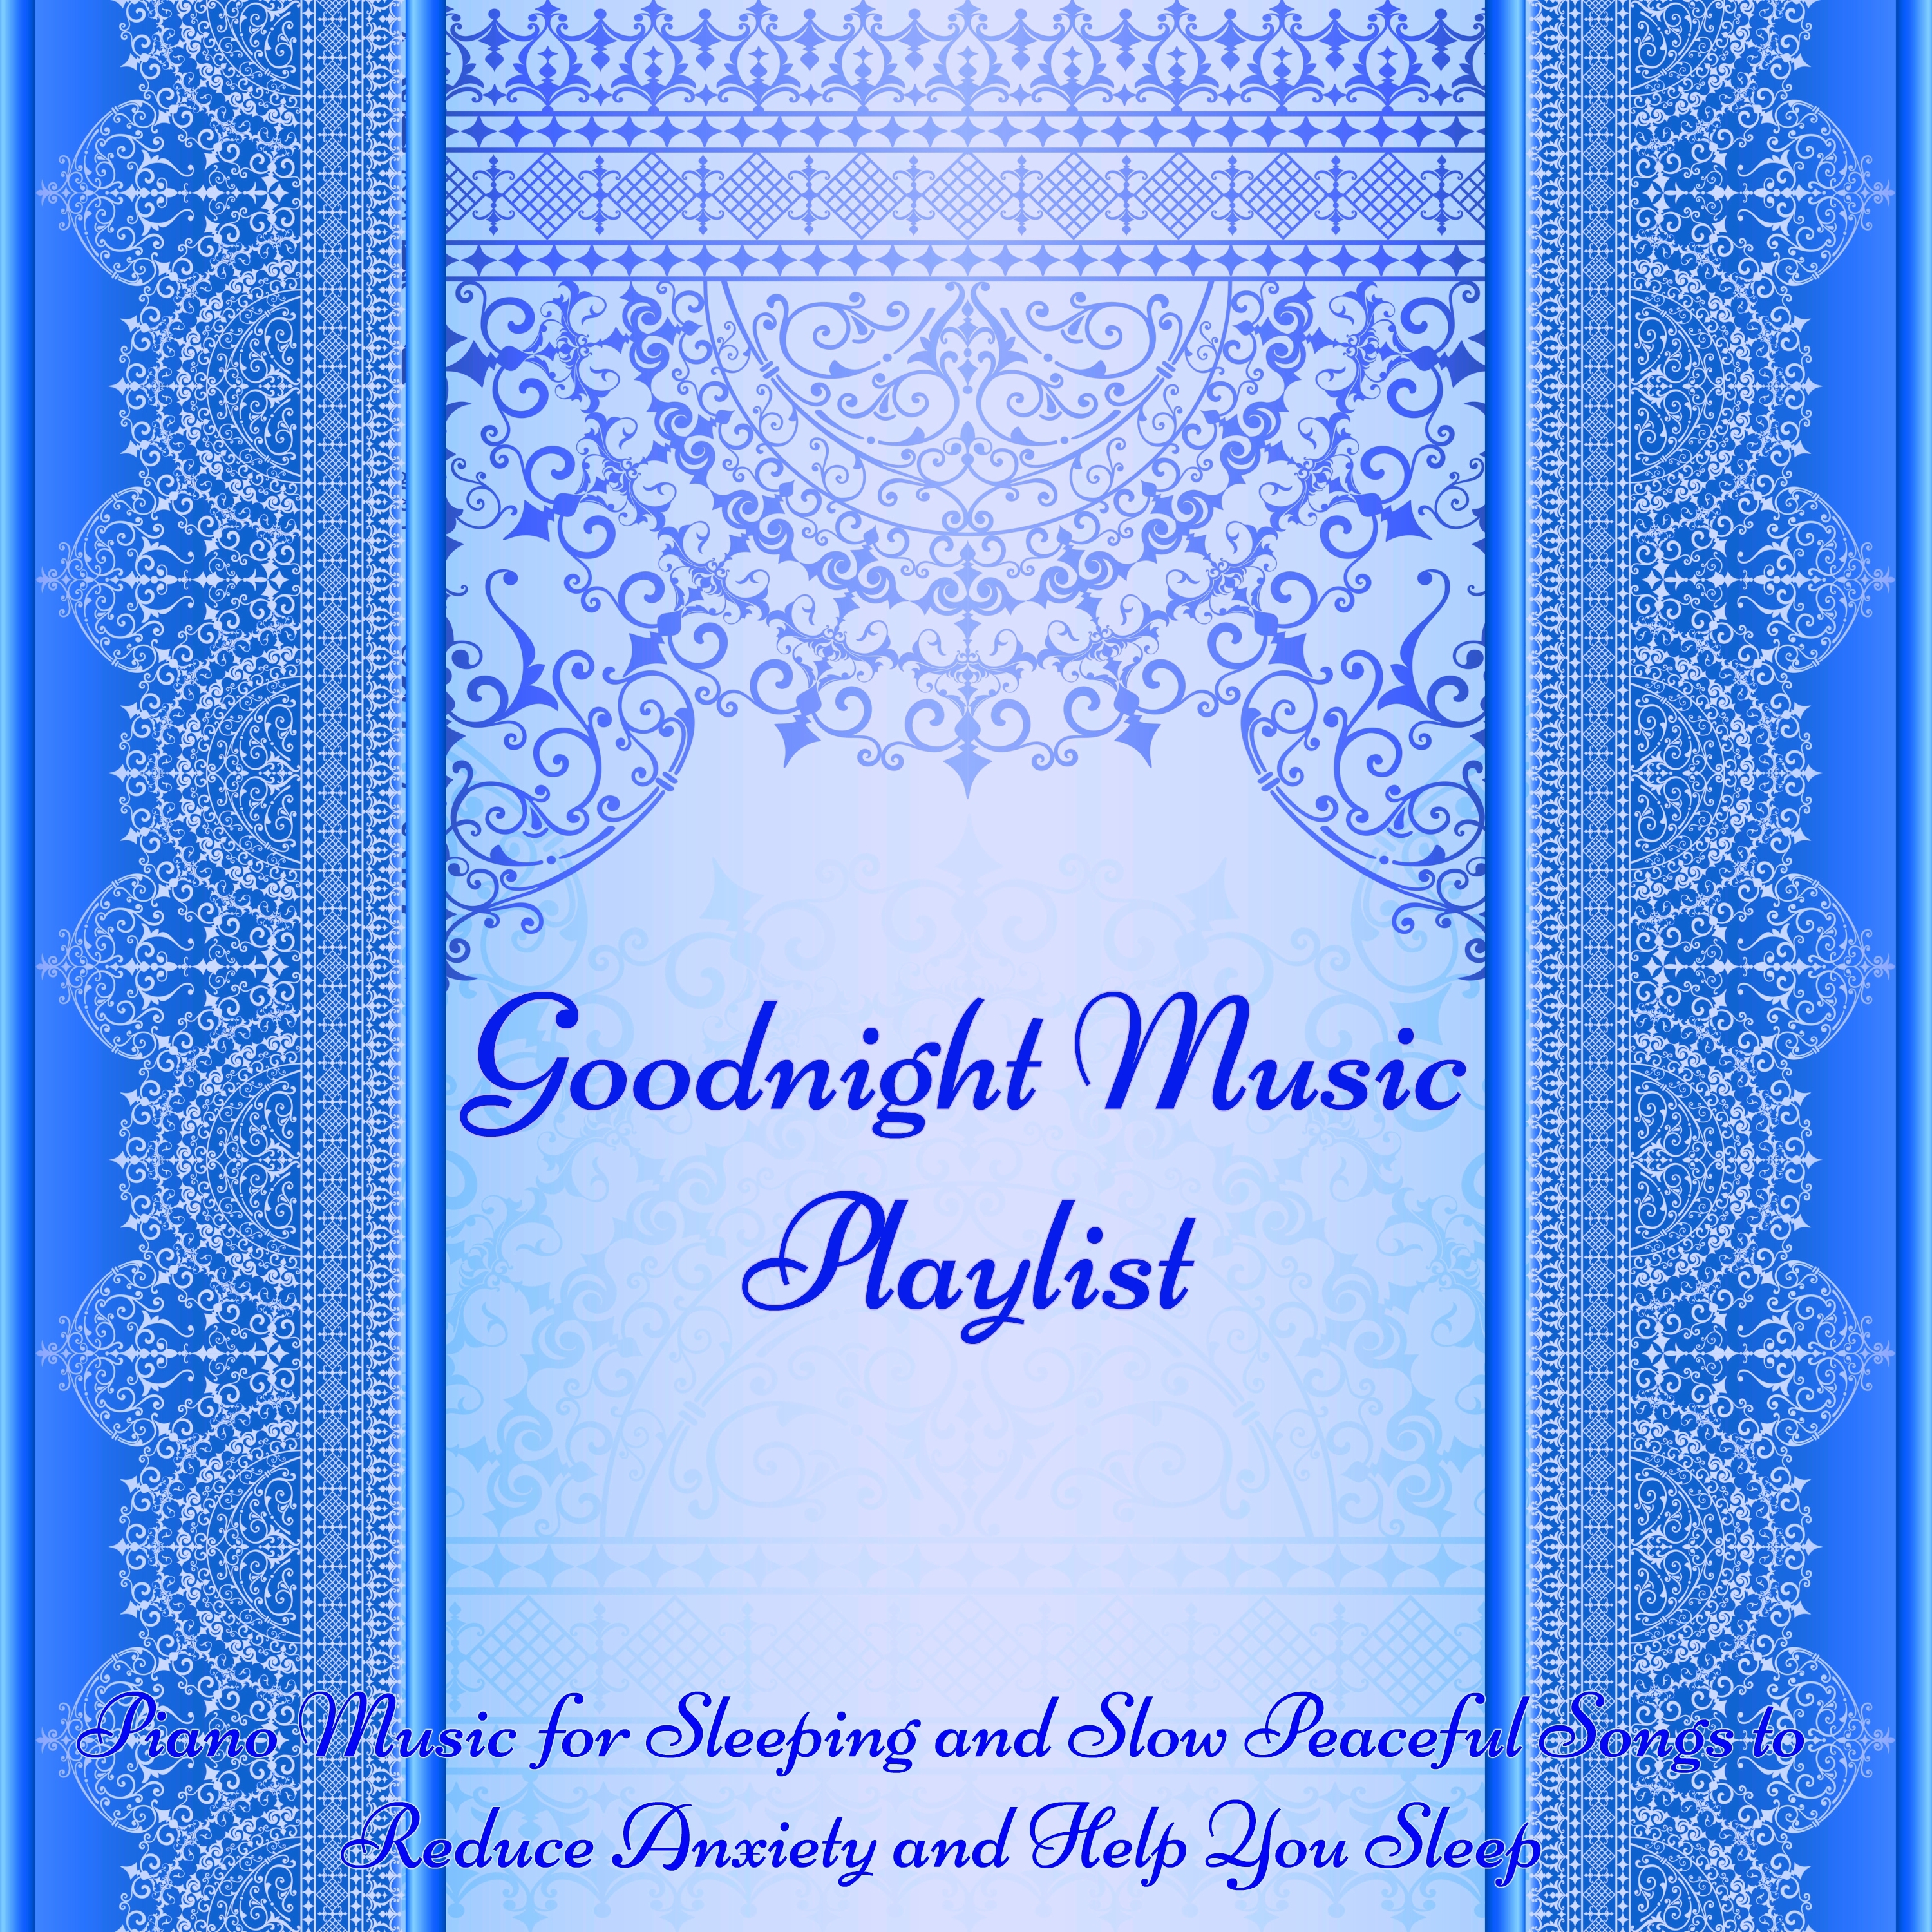 Goodnight Music Playlist -  Piano Music for Sleeping and Slow Peaceful Songs to Reduce Anxiety and Help You Sleep